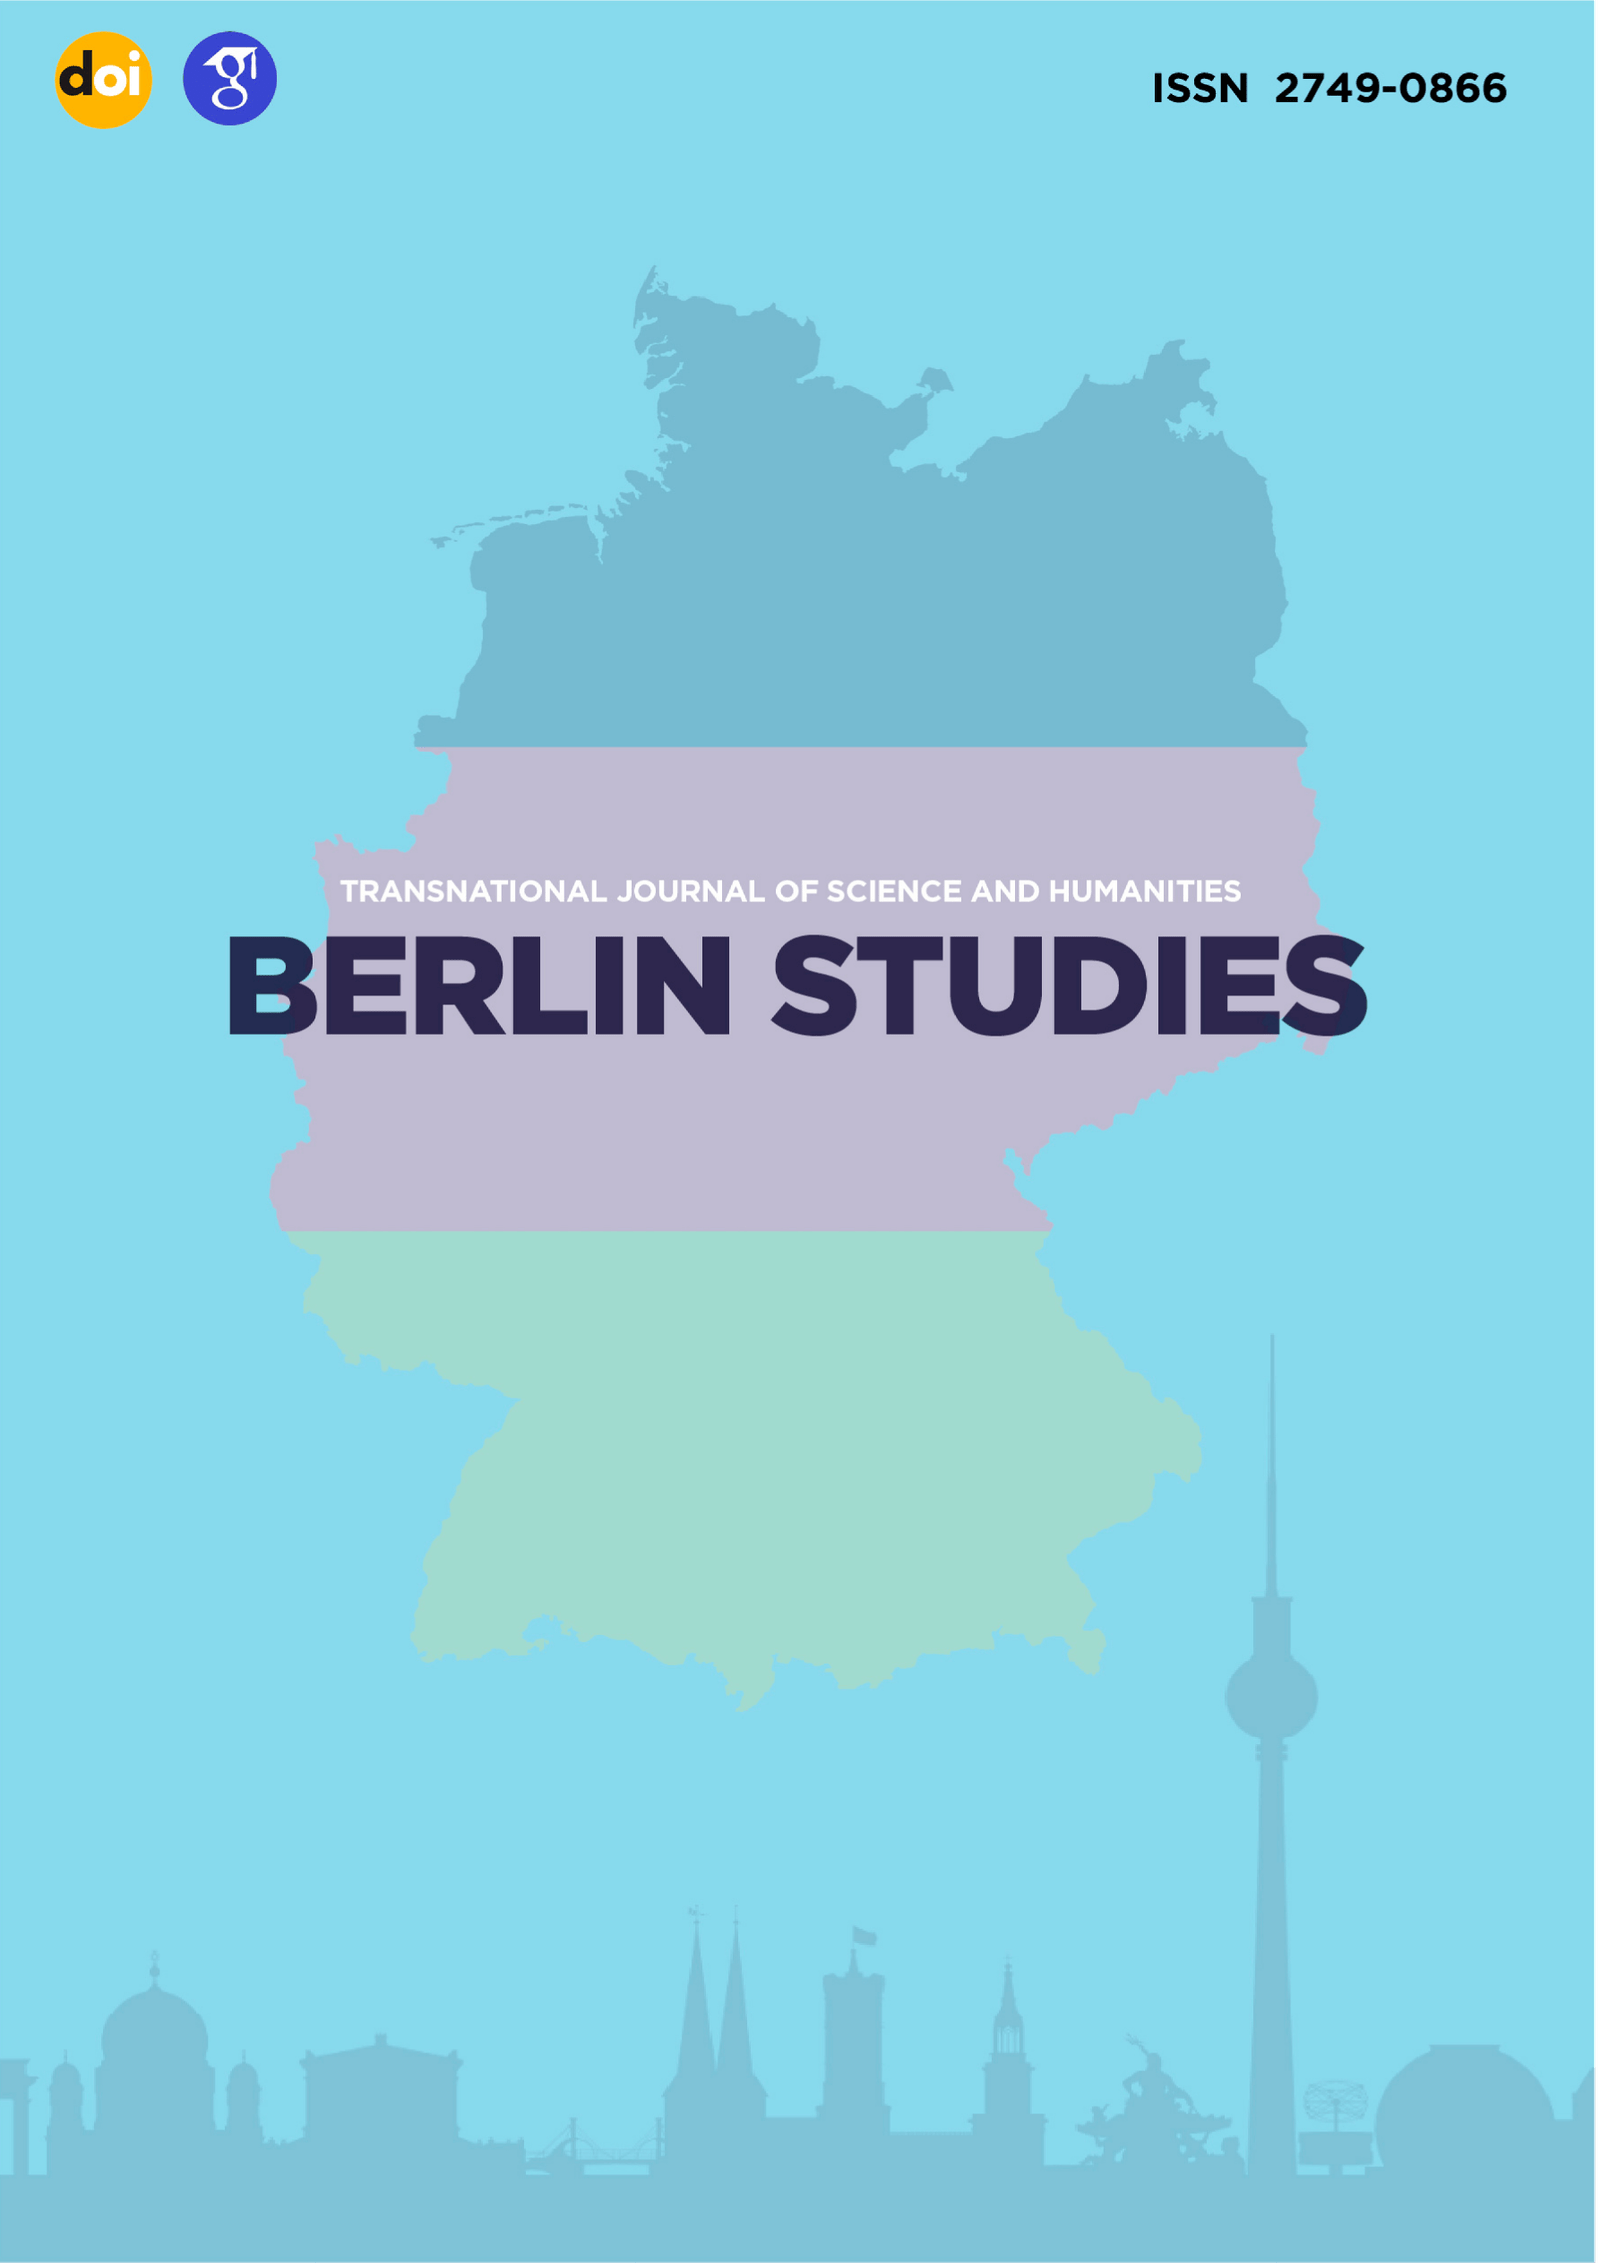 					View Vol. 3 No. 1.4 Legal sciences (2023): Berlin Studies Transnational Journal of Science and Humanities
				